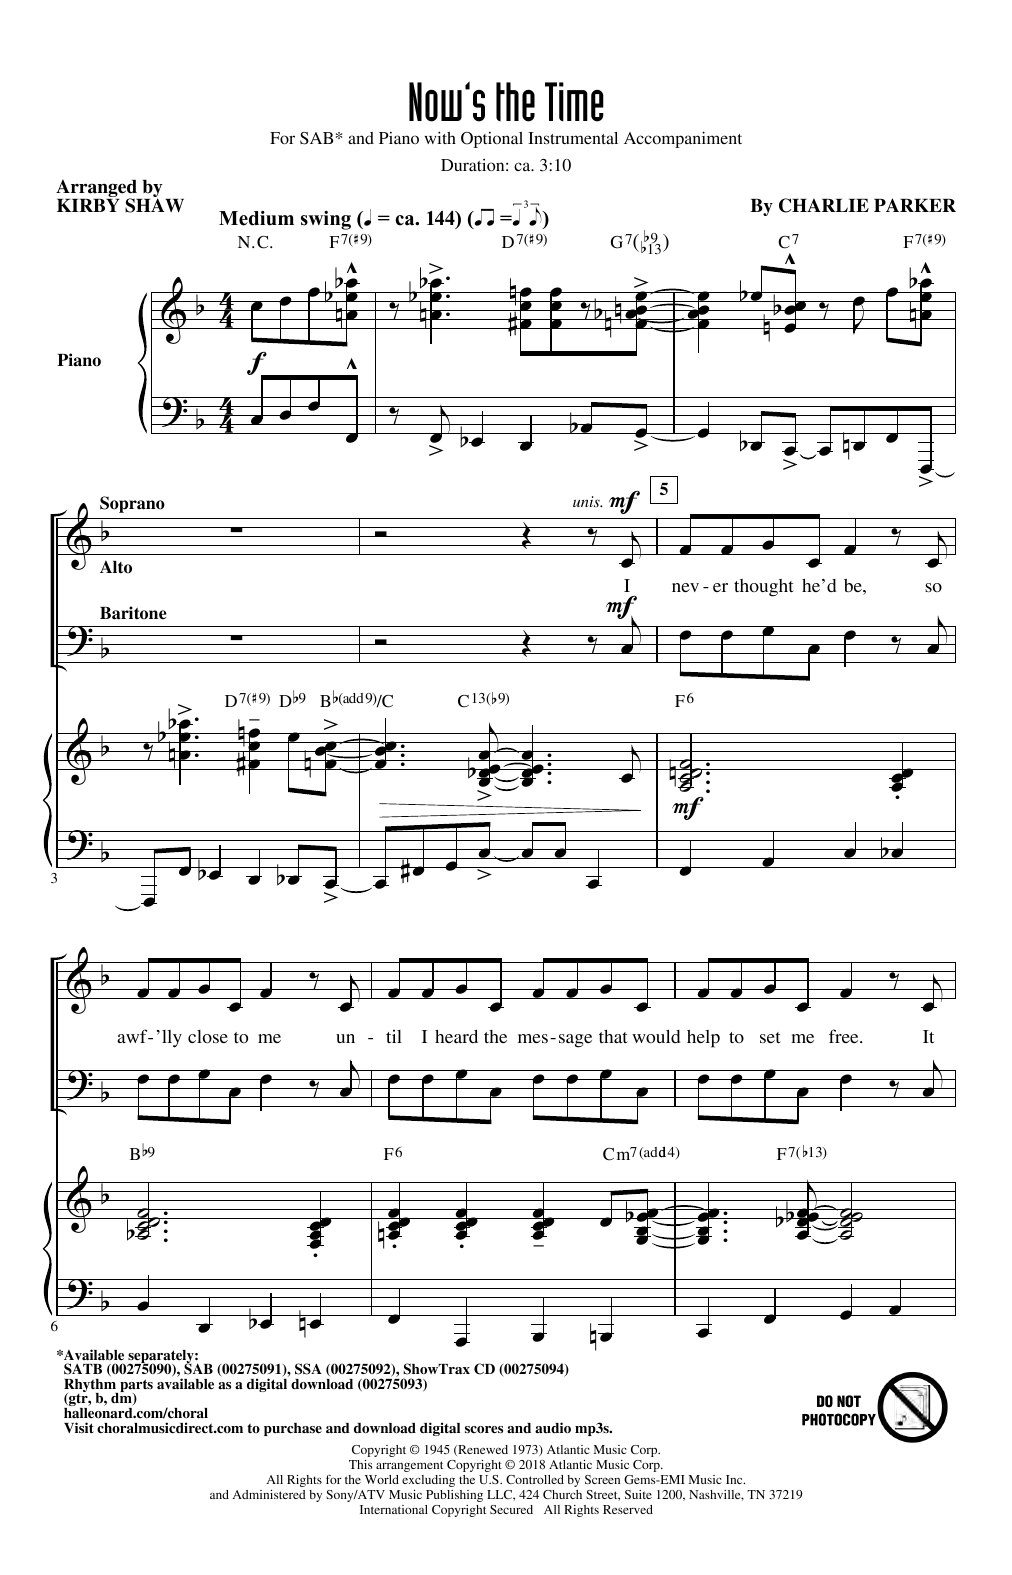 Download Charlie Parker Now's The Time (arr. Kirby Shaw) Sheet Music